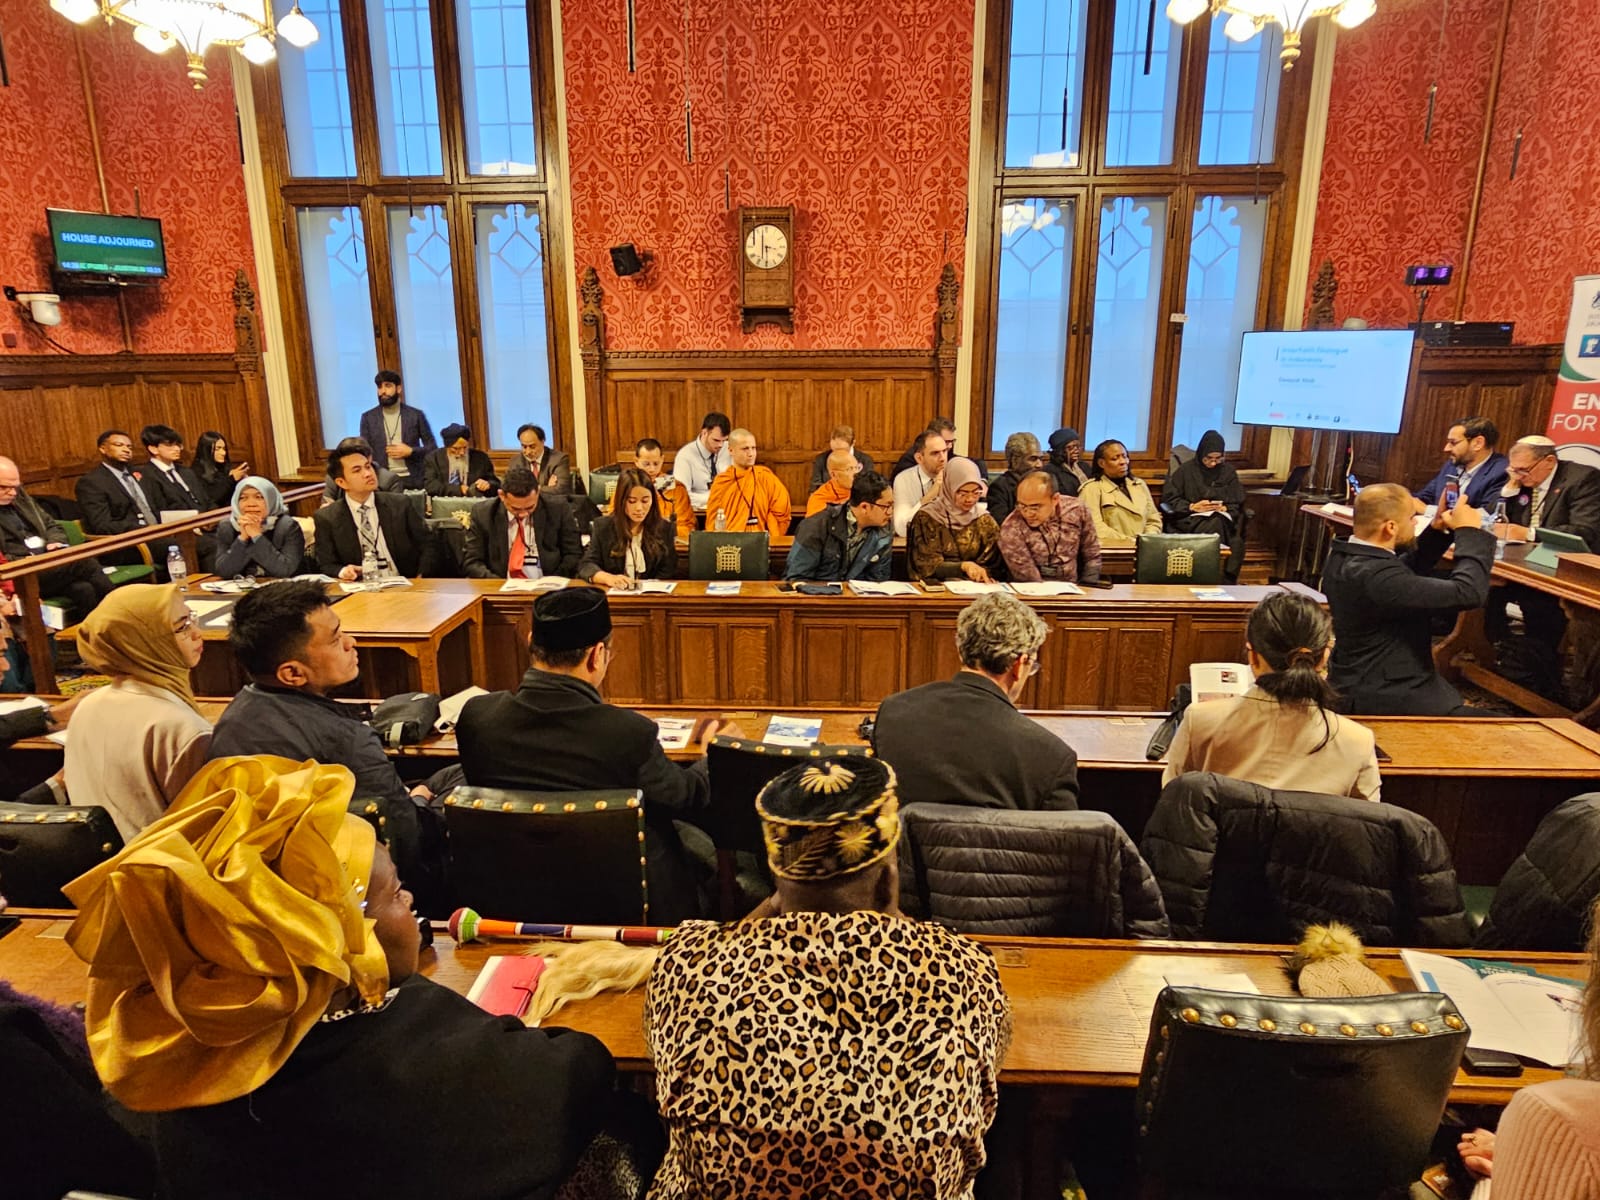 Aido leadership was among the leaders who were invited to the UK Parliament on 16th November 2023